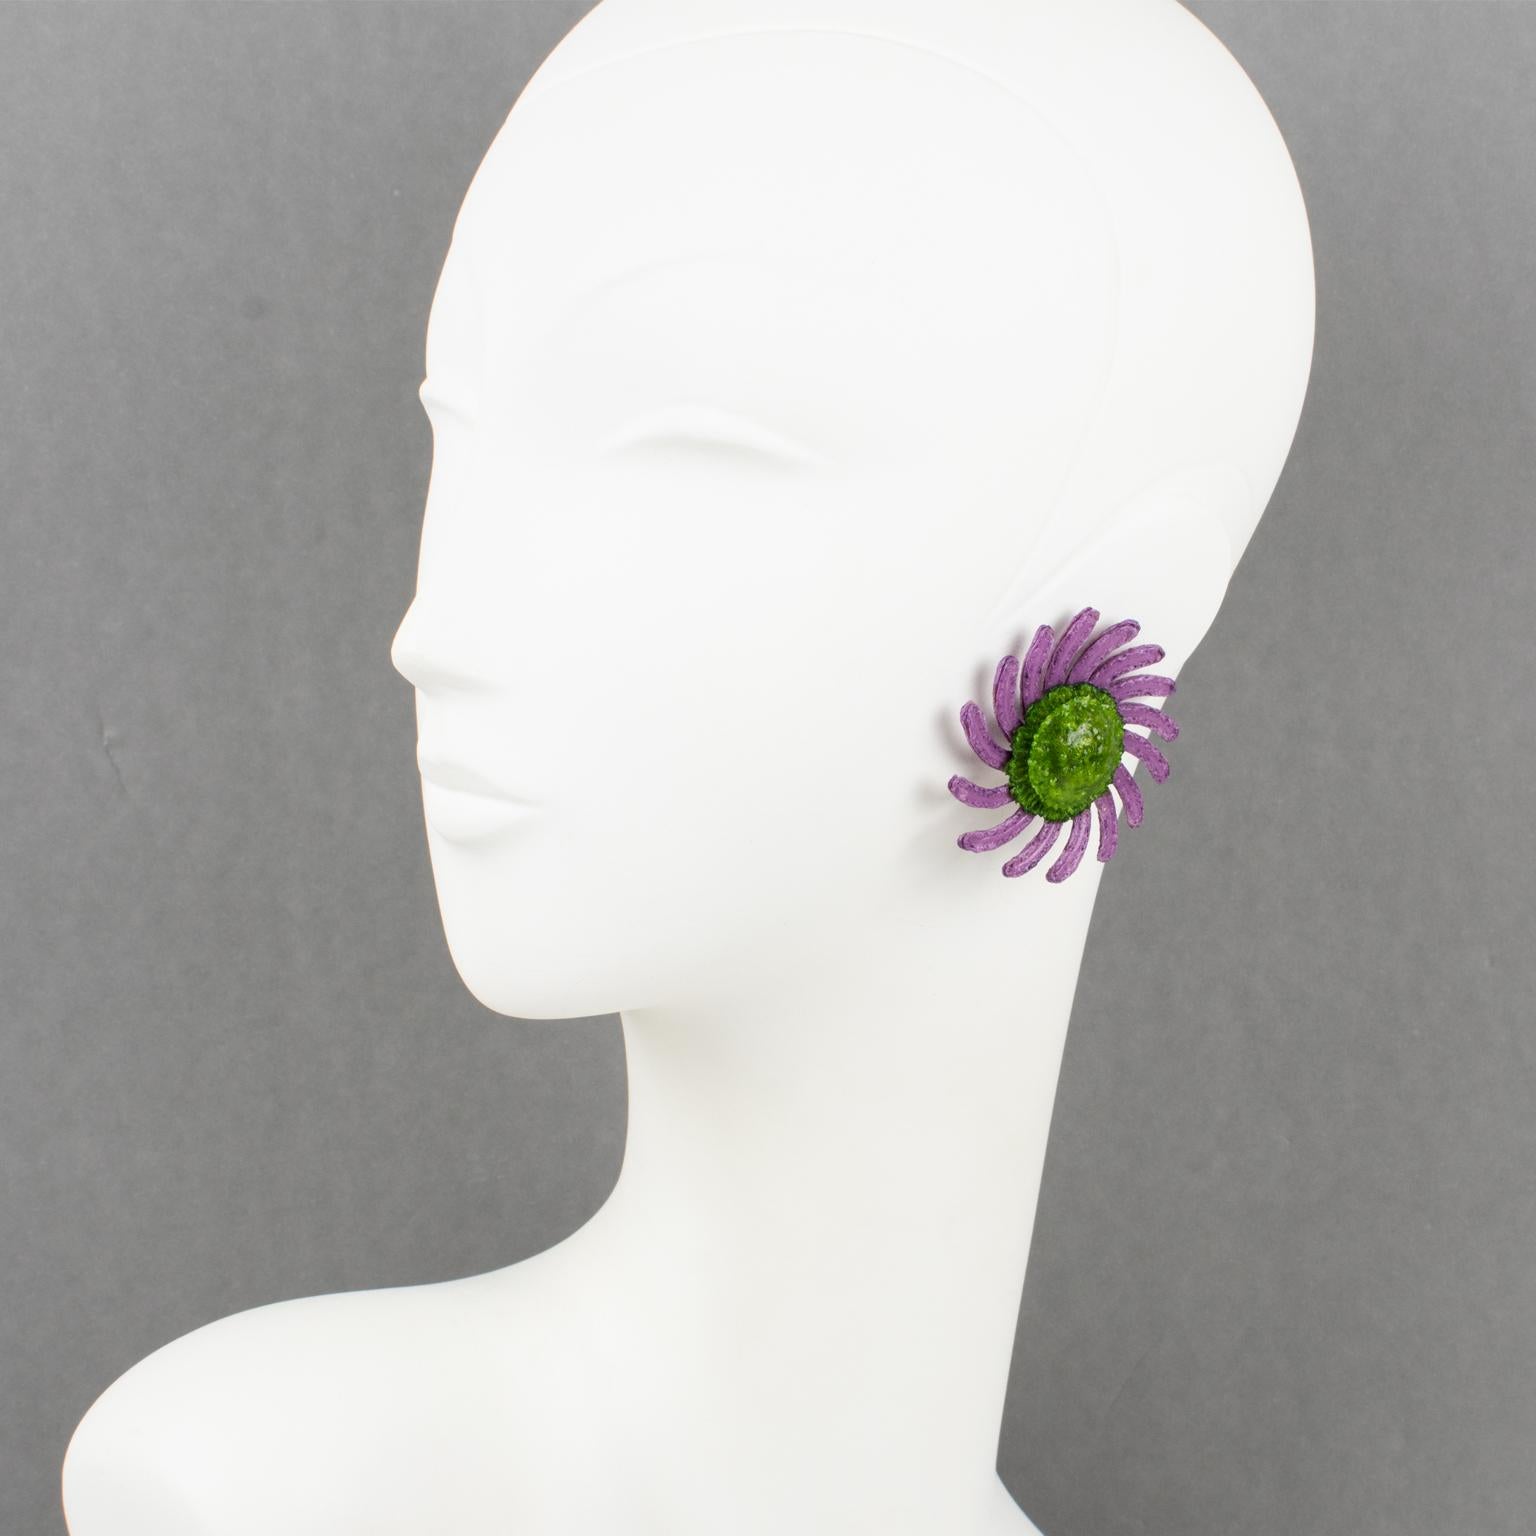 These elegant Monique Vedie resin or Talosel clip-on earrings feature a daisy flower shape in a carved dimensional design with a textured pattern in pearlized lavender purple color contrasted with an avocado green textured heart. They are the